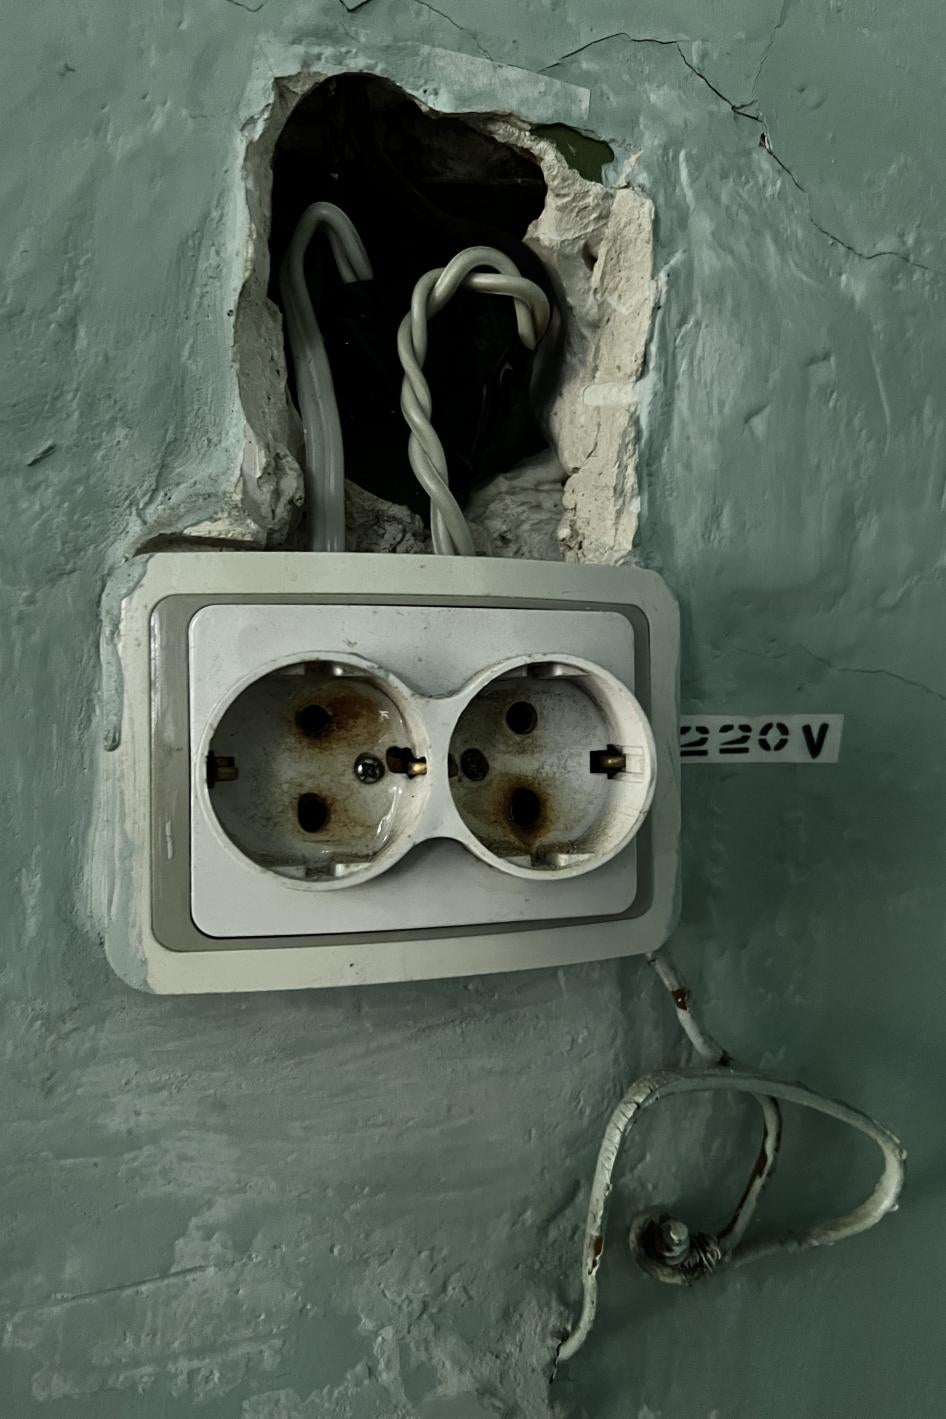 Blackened electrical sockets in a room at the City Railway Polyclinic, a building Russian forces used as a base in Izium, Ukraine, and where they tortured people including through electric shocks. September 22, 2022 